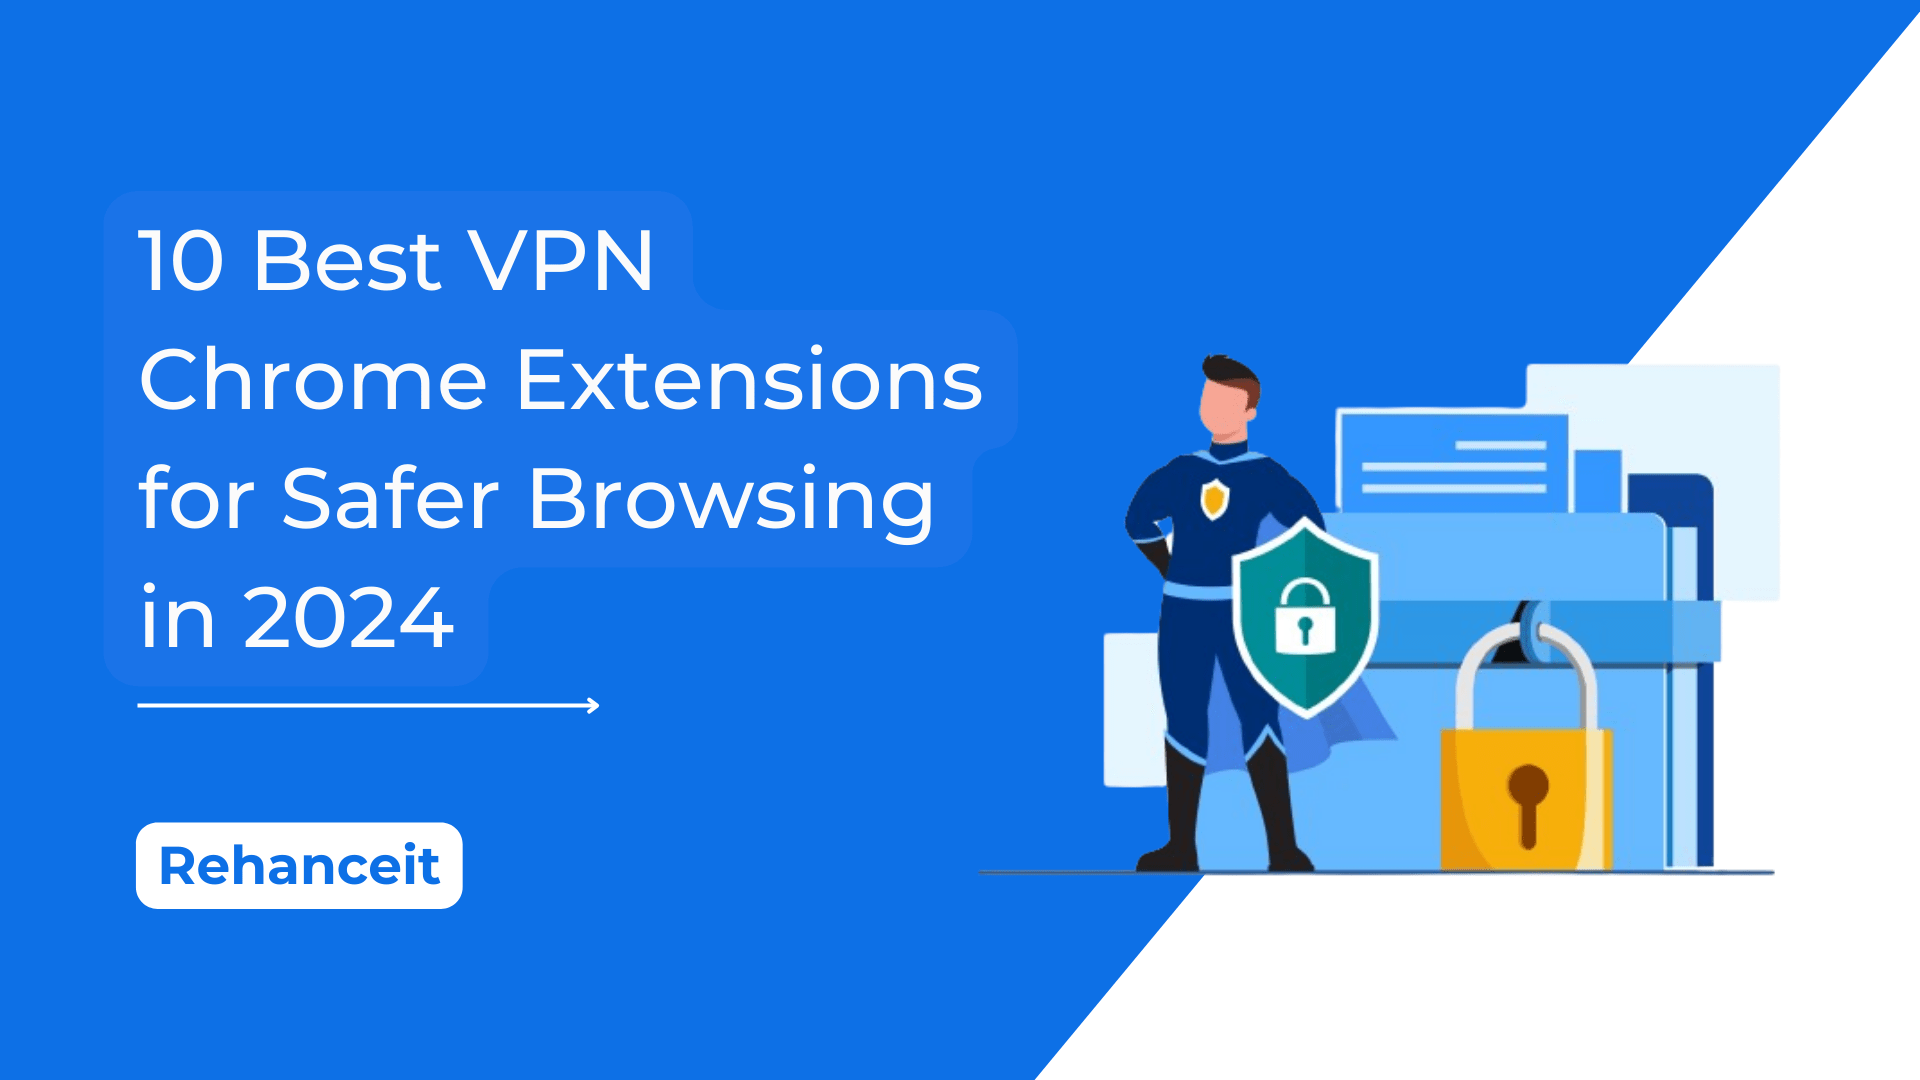 You are currently viewing 10 Best VPN Chrome Extensions for Safer Browsing in 2024